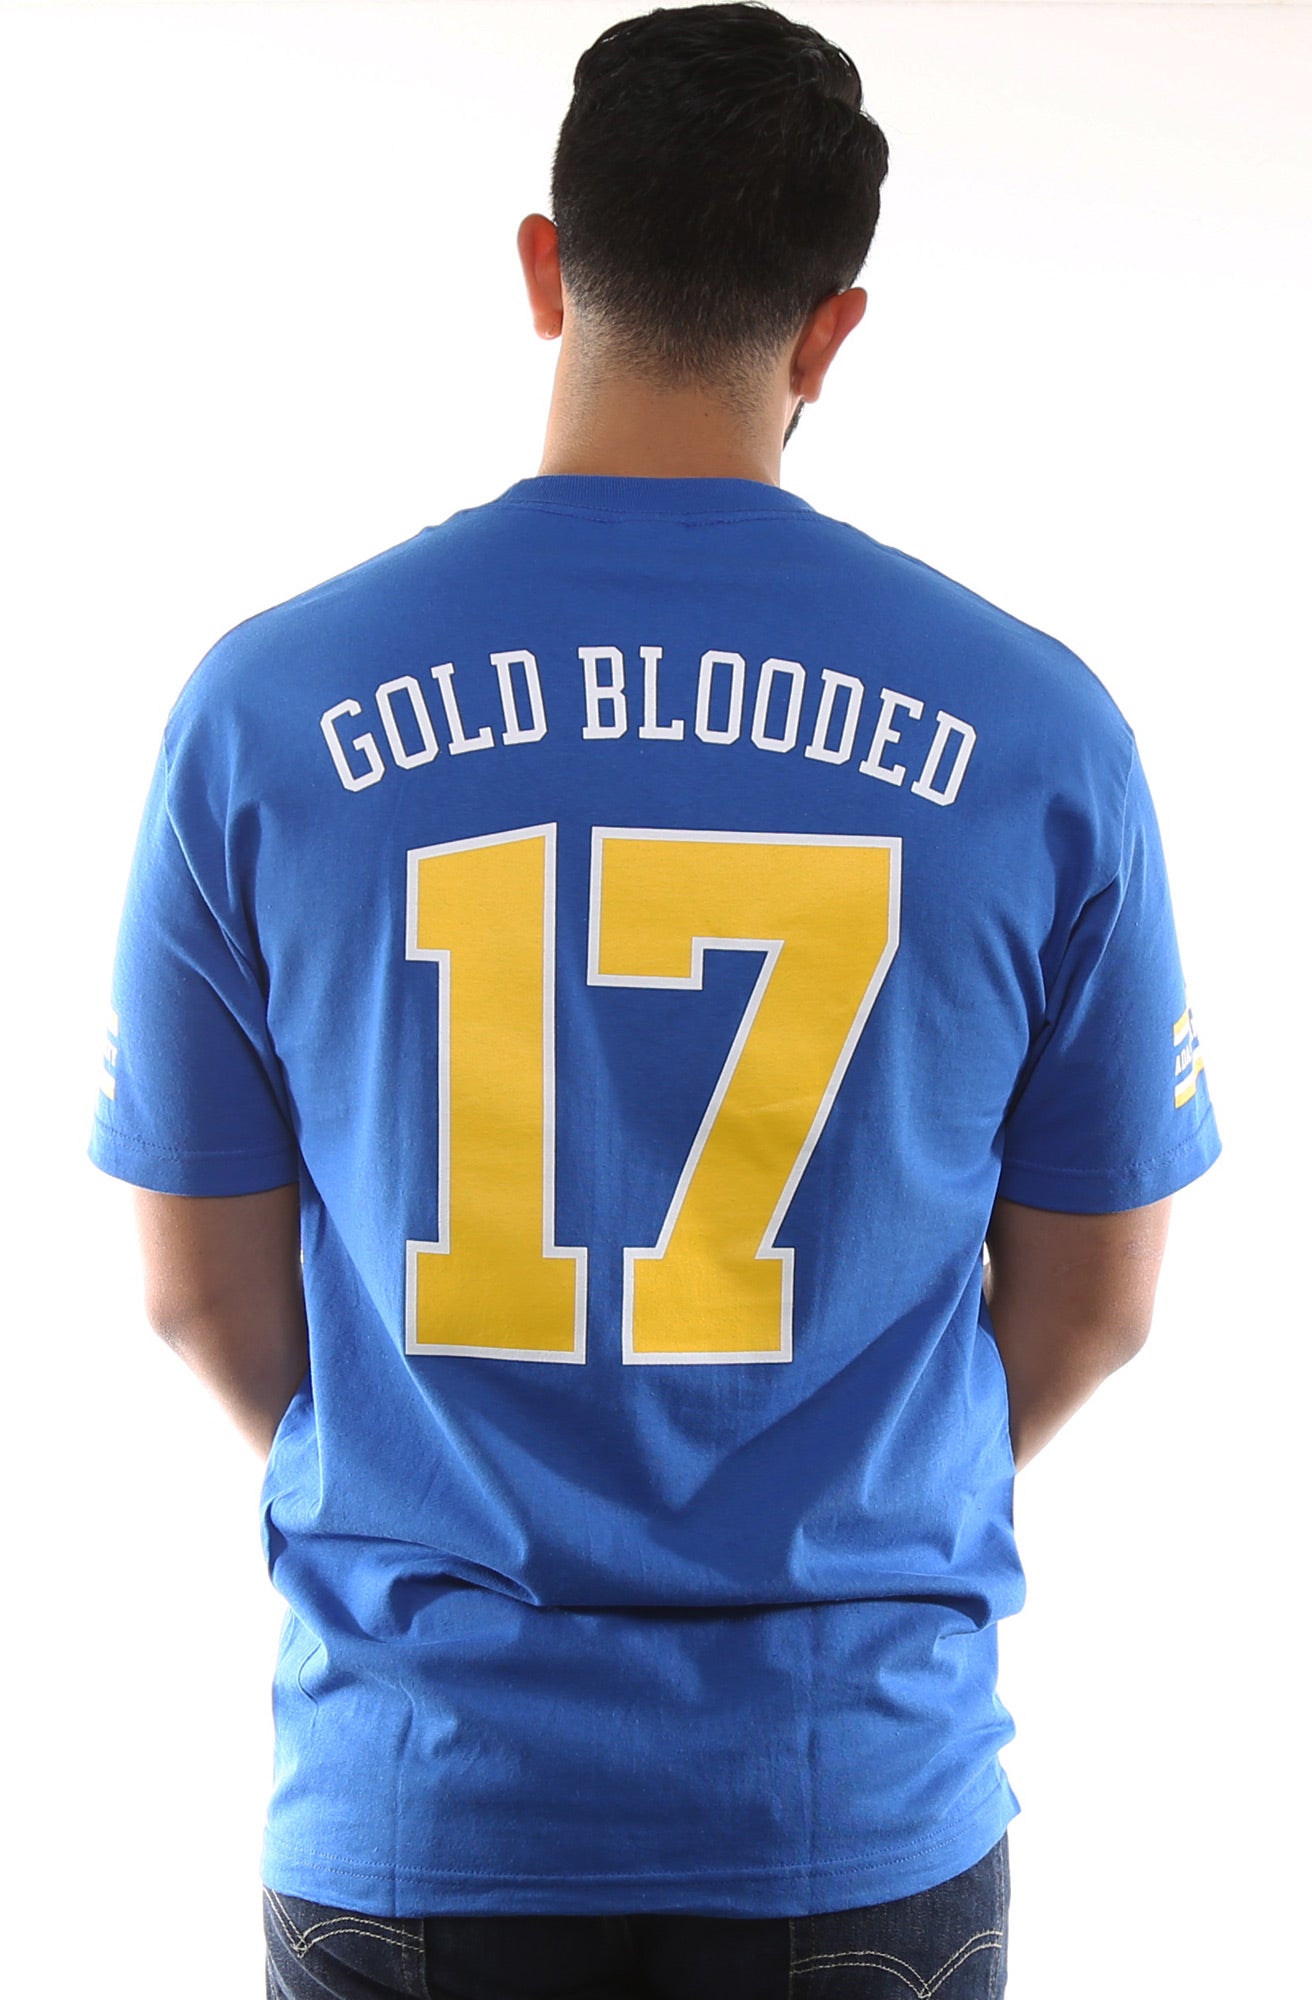 Gold Blooded Royalty :: 17 (Men's Royal Tee)